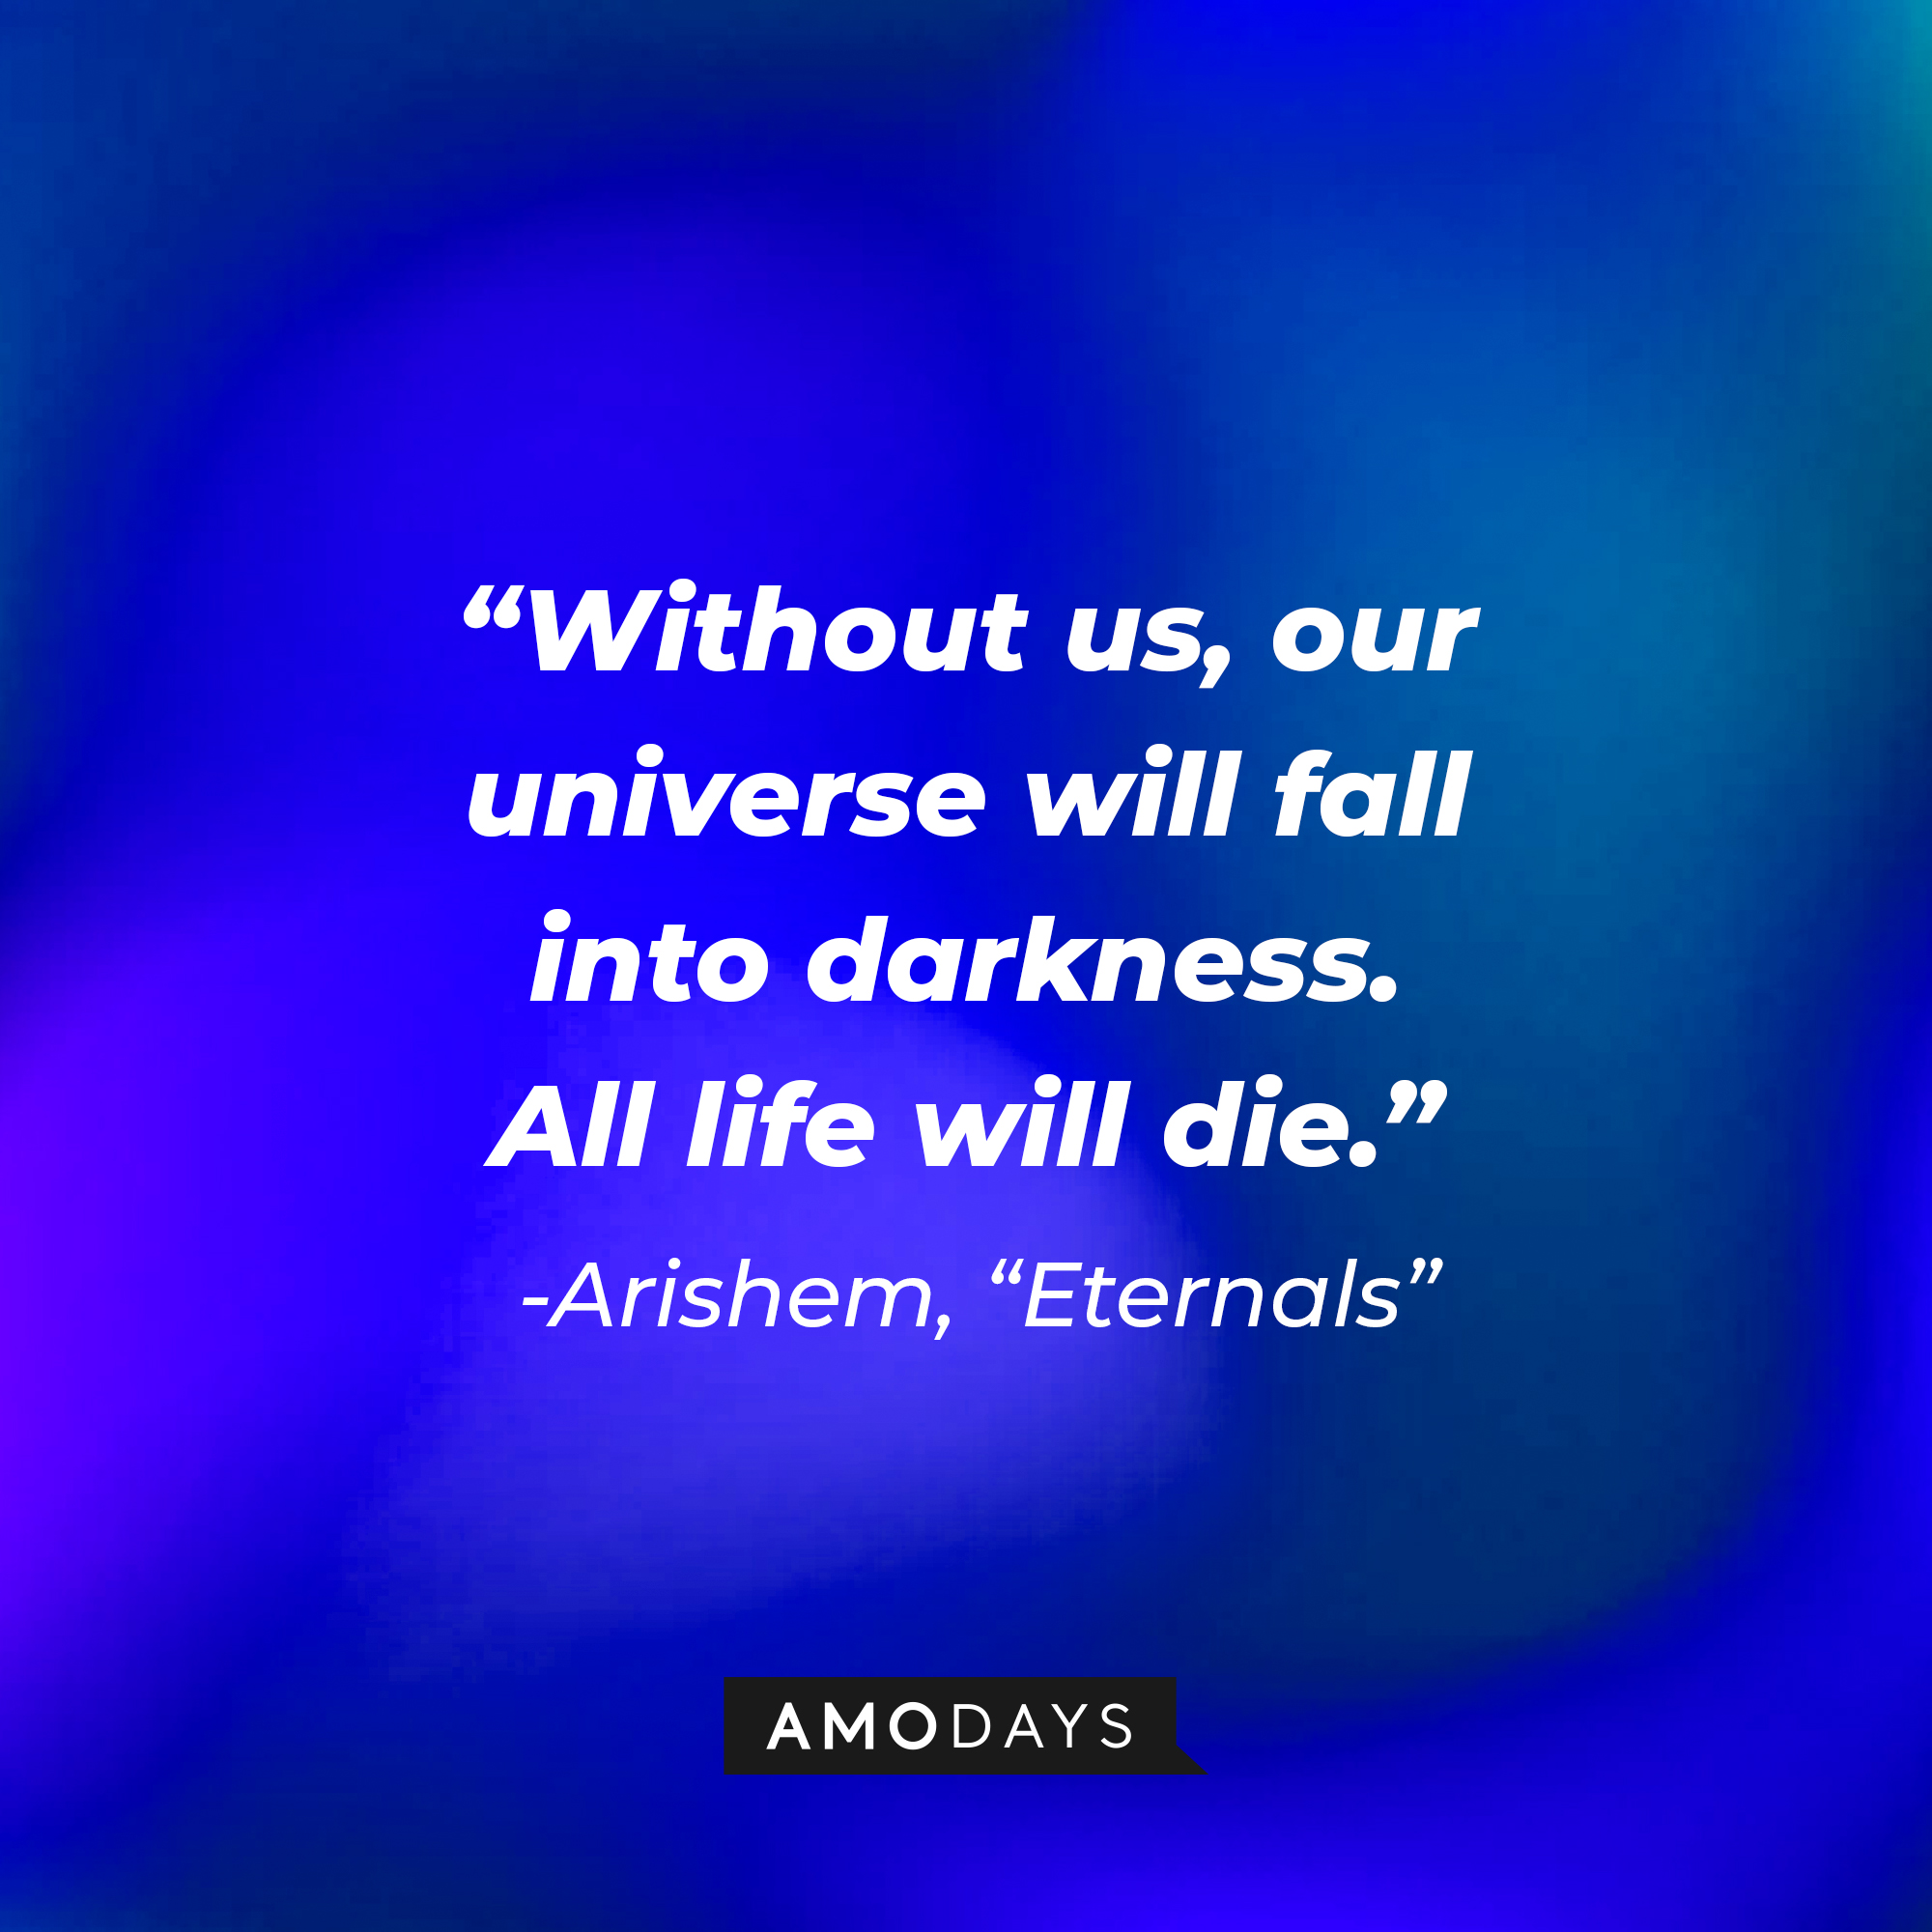 Arishem’s quote: "Without us, our universe will fall into darkness. All life will die." | Image: AmoDays